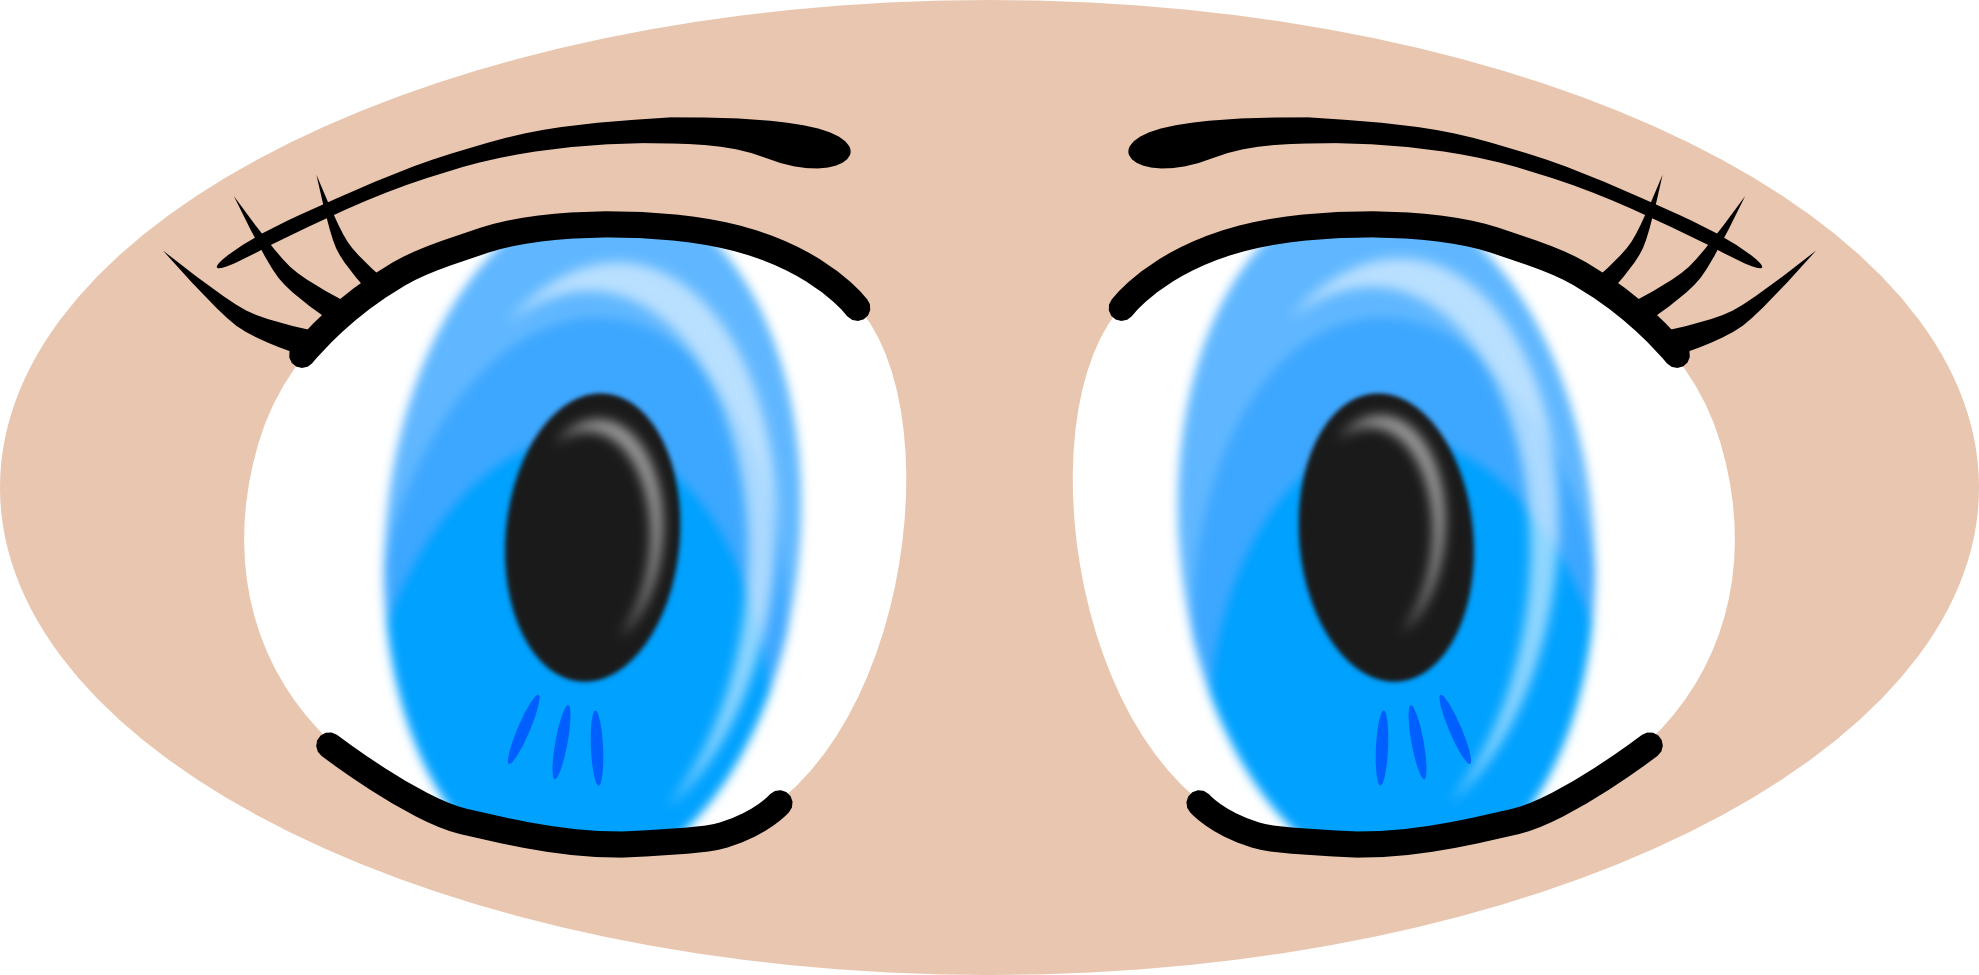 Eyes and ears clipart